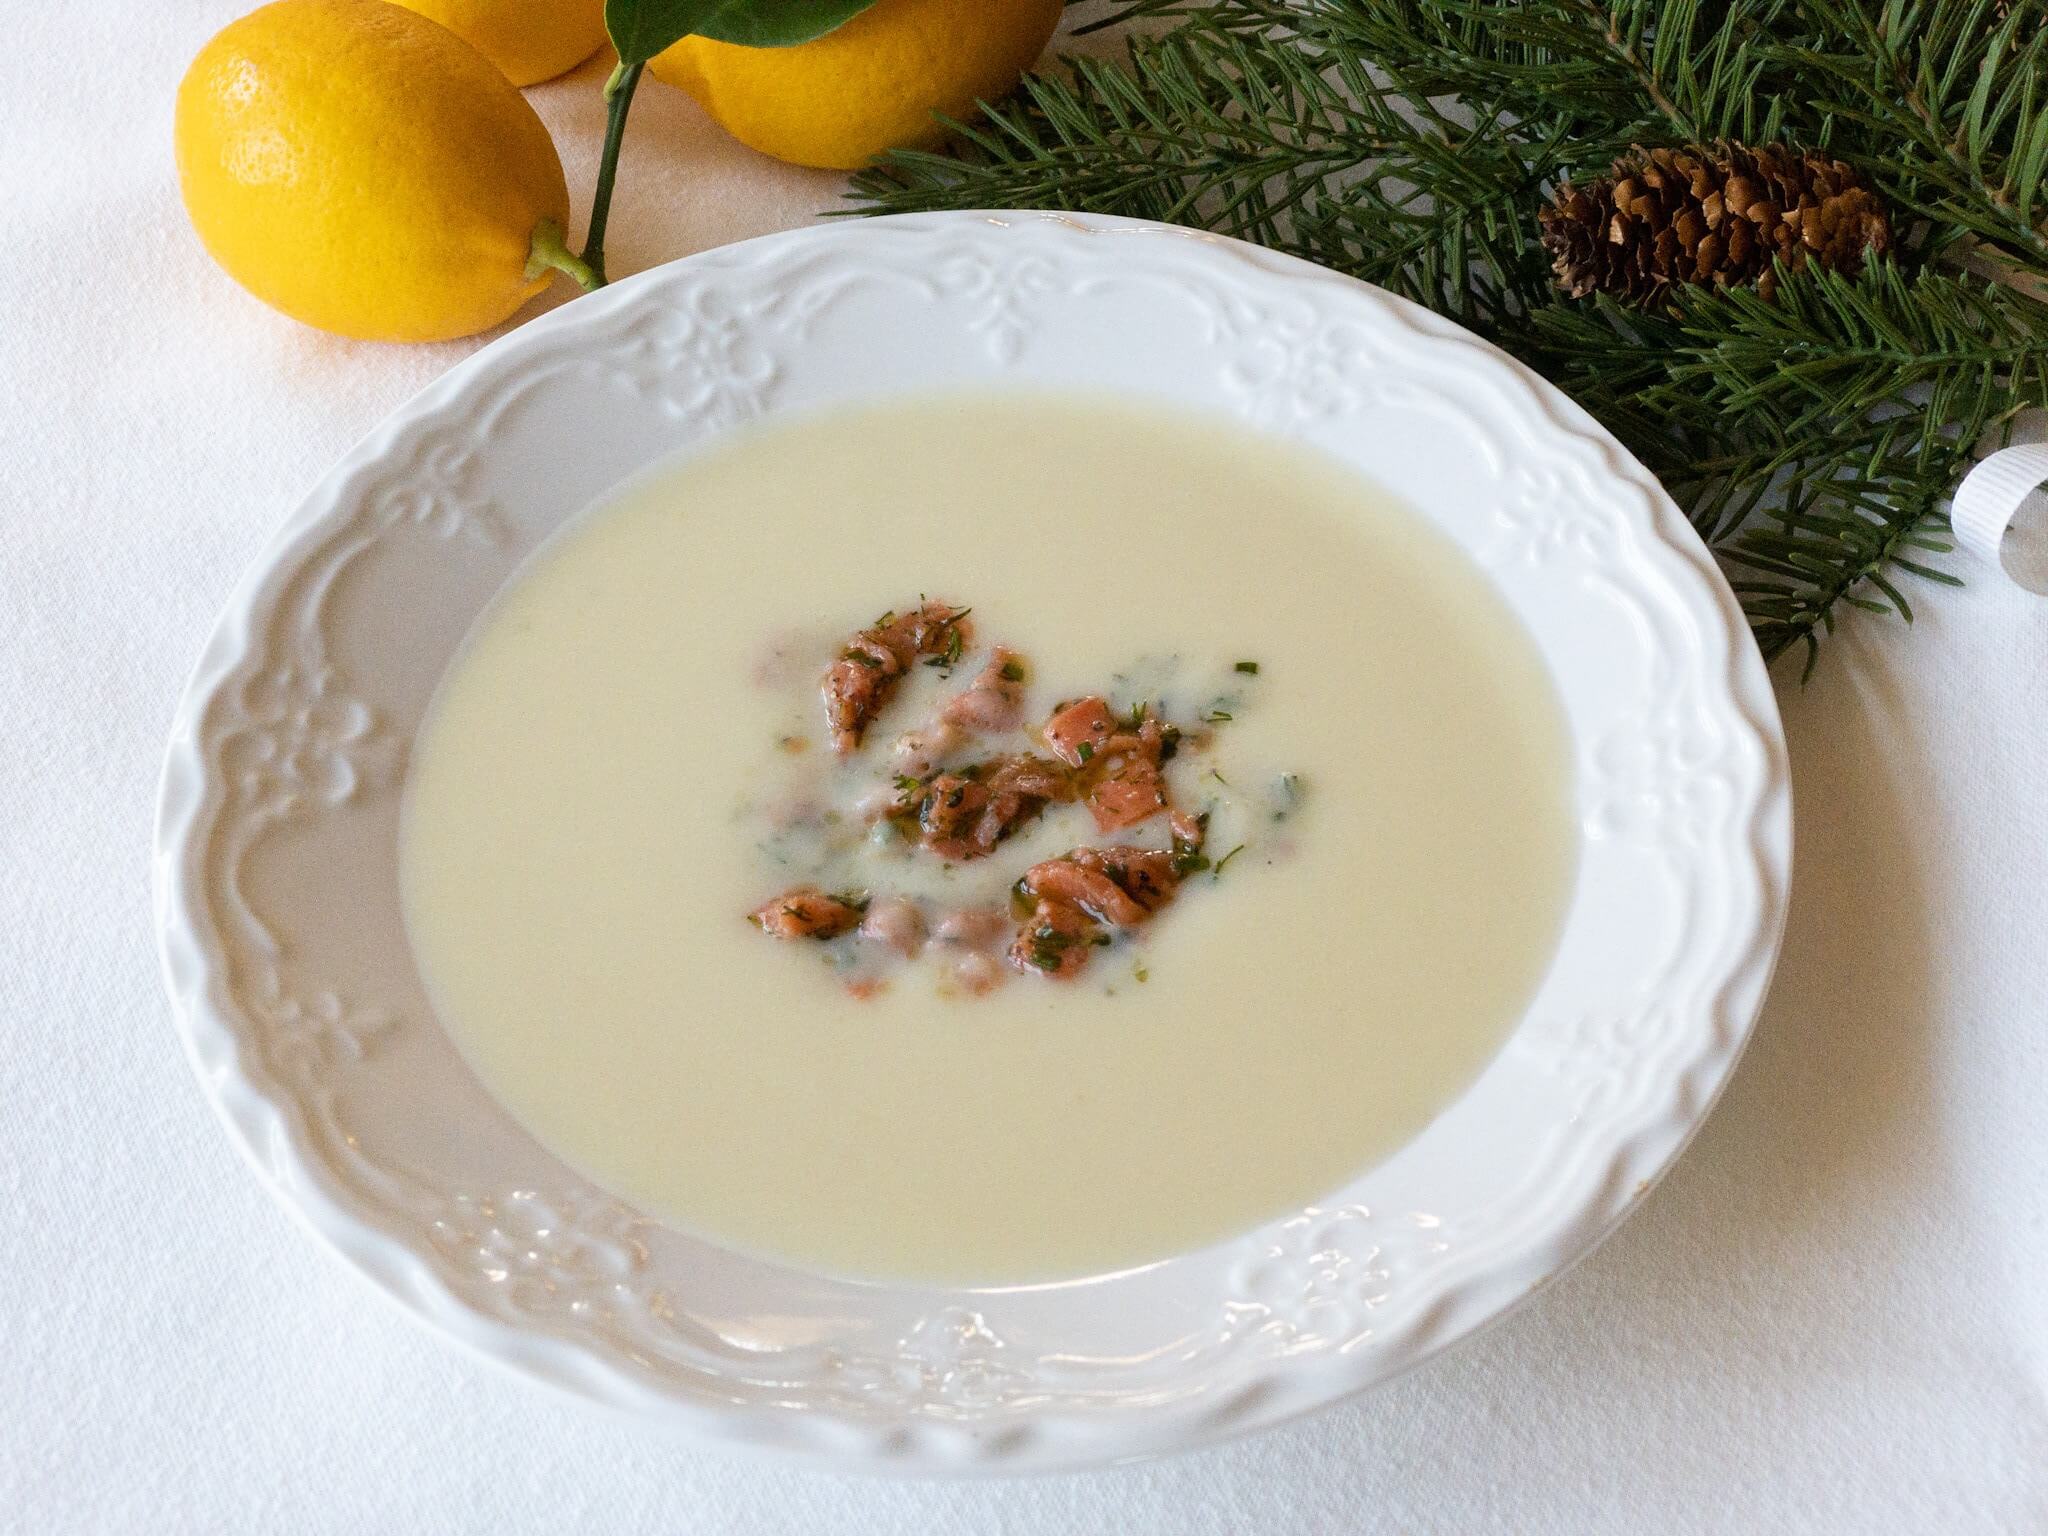 POTATO, LEEK AND CELERY ROOT SOUP WITH HERBED SMOKED SALMON TOPPING